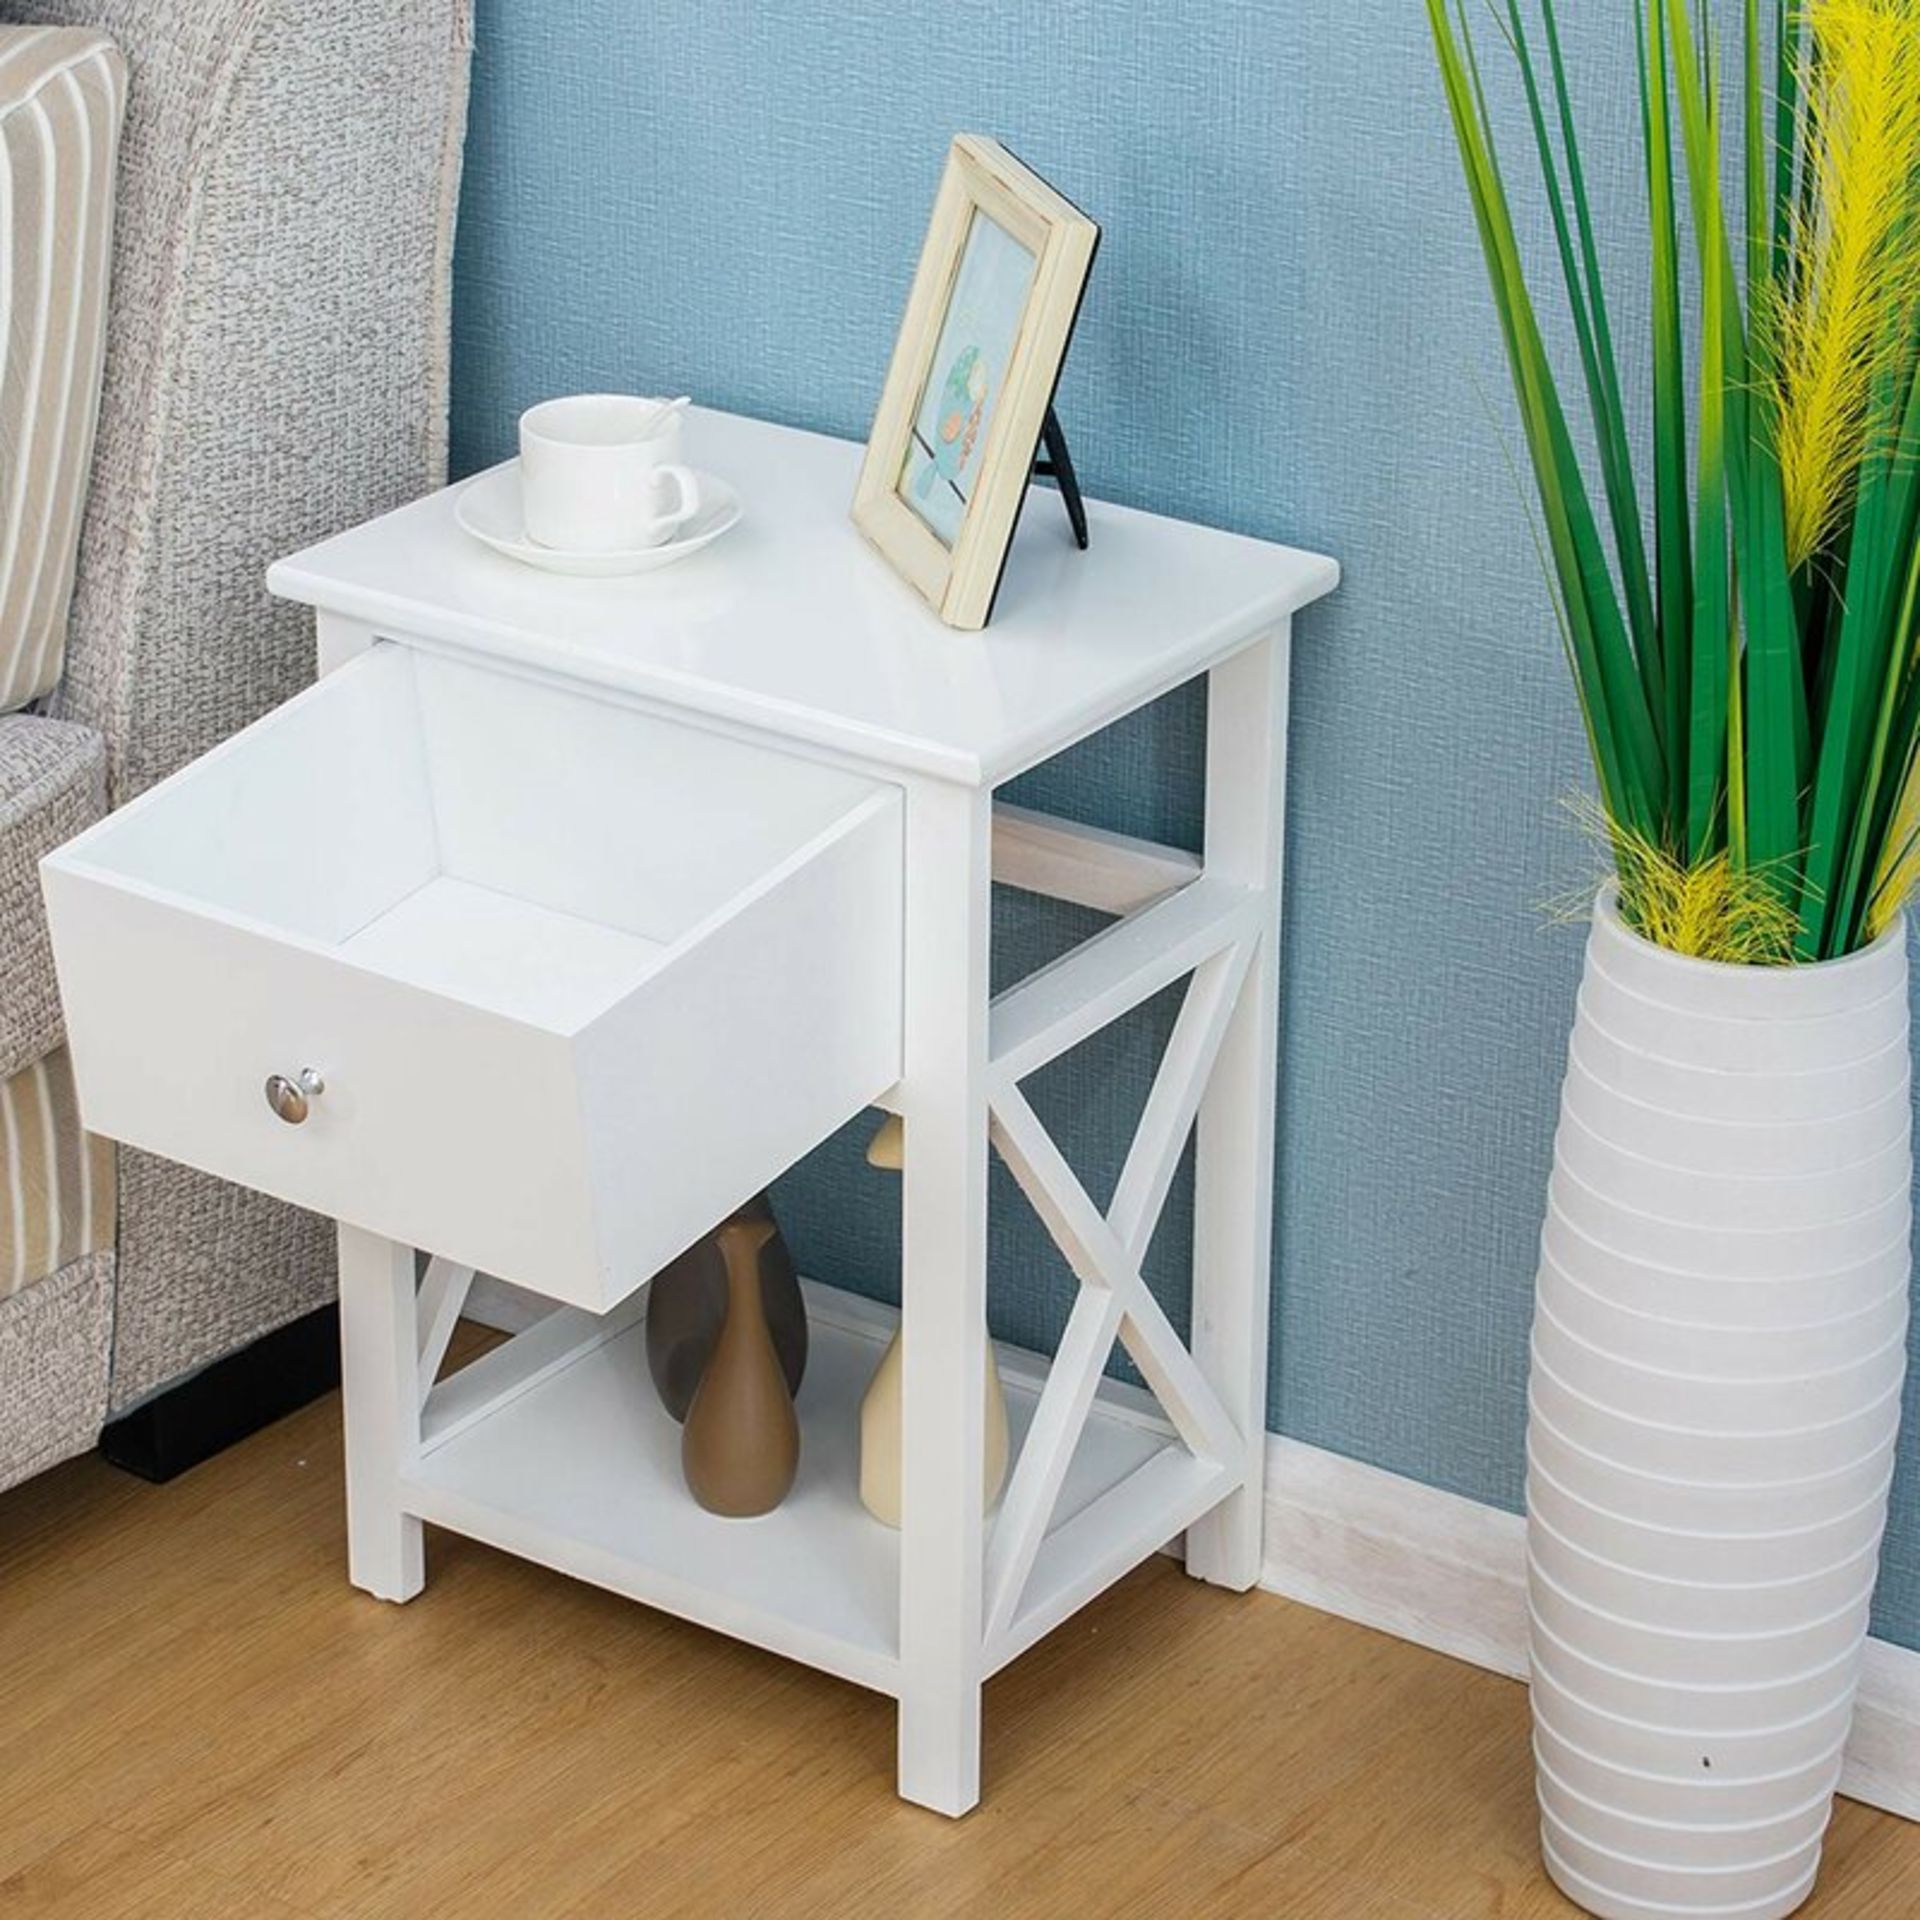 Stanhope 1 Drawer Bedside Table - RRP £49.99 - Image 2 of 2